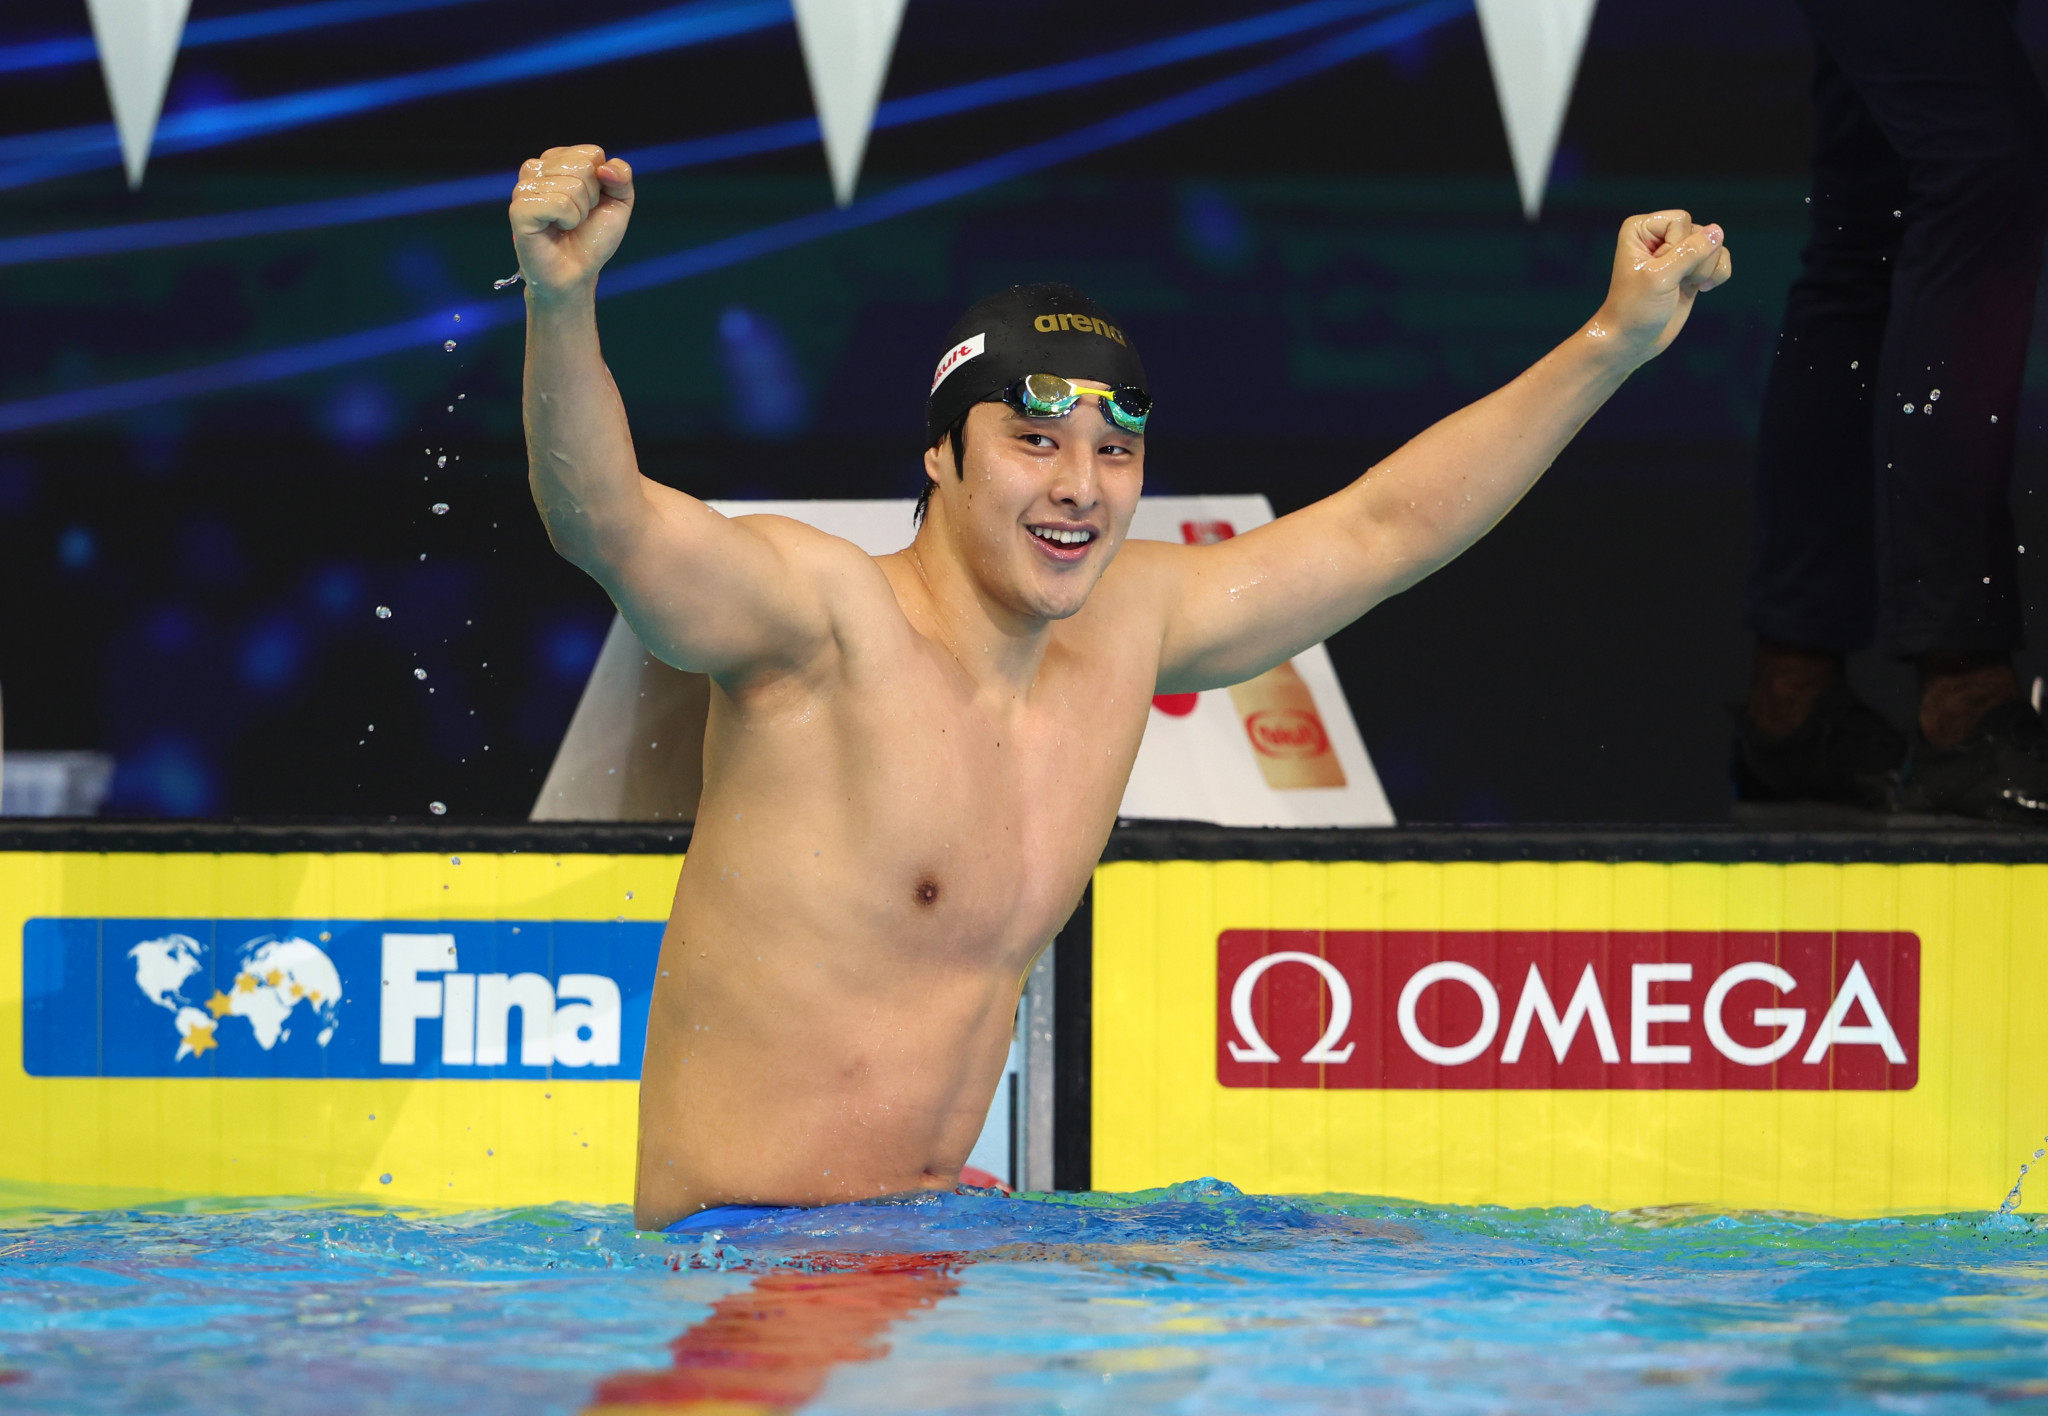 Japan's Daiya Seto is delighted after winning the men's 400m individual medley crown for the fifth time ©Getty Images